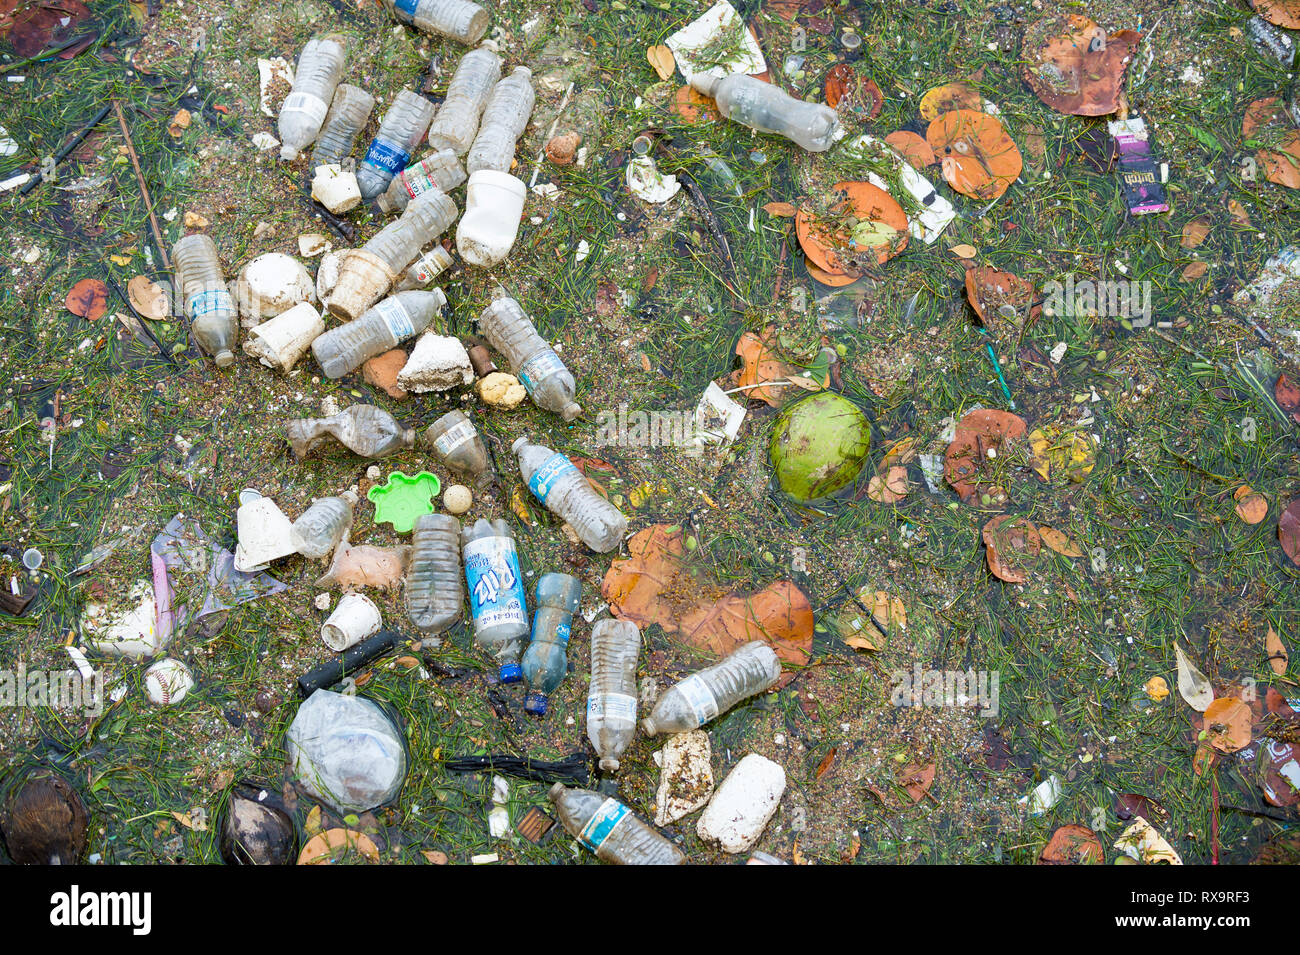 MIAMI - SEPTEMBER, 2018: Plastic water bottles, cups, and bits of Styrofoam float with leaves and seagrass in polluted Biscayne Bay. Stock Photo